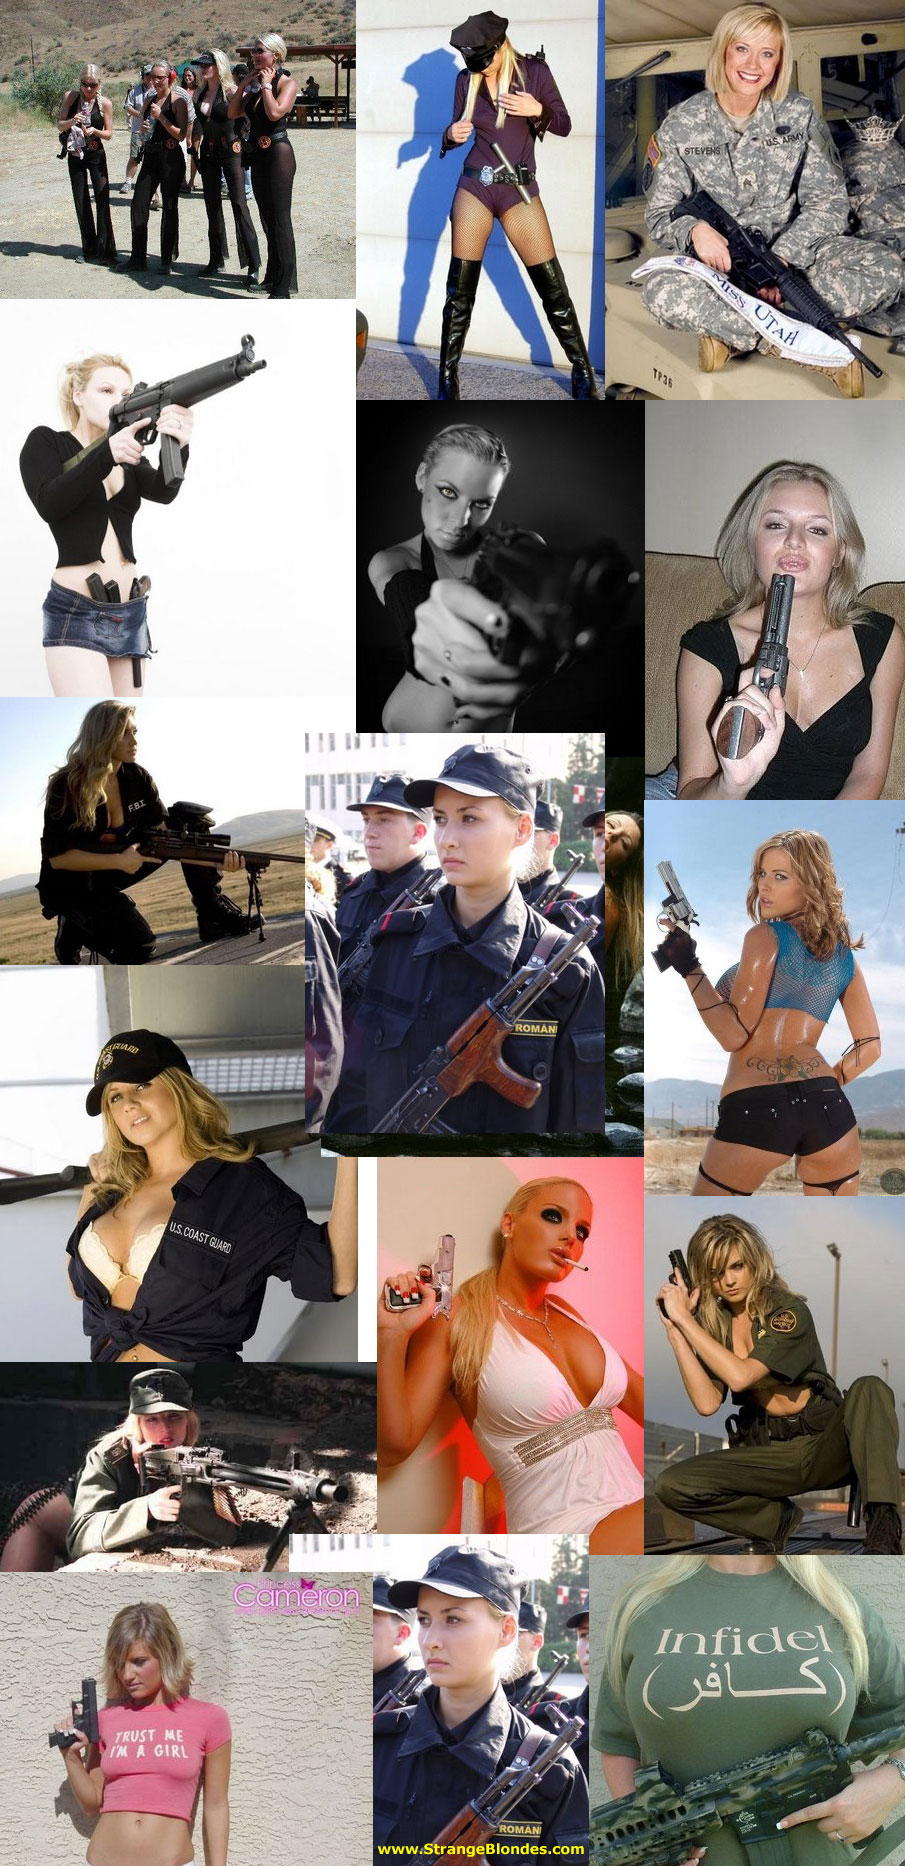 HOT BLONDES WITH BIG GUNS AND FIREARMS